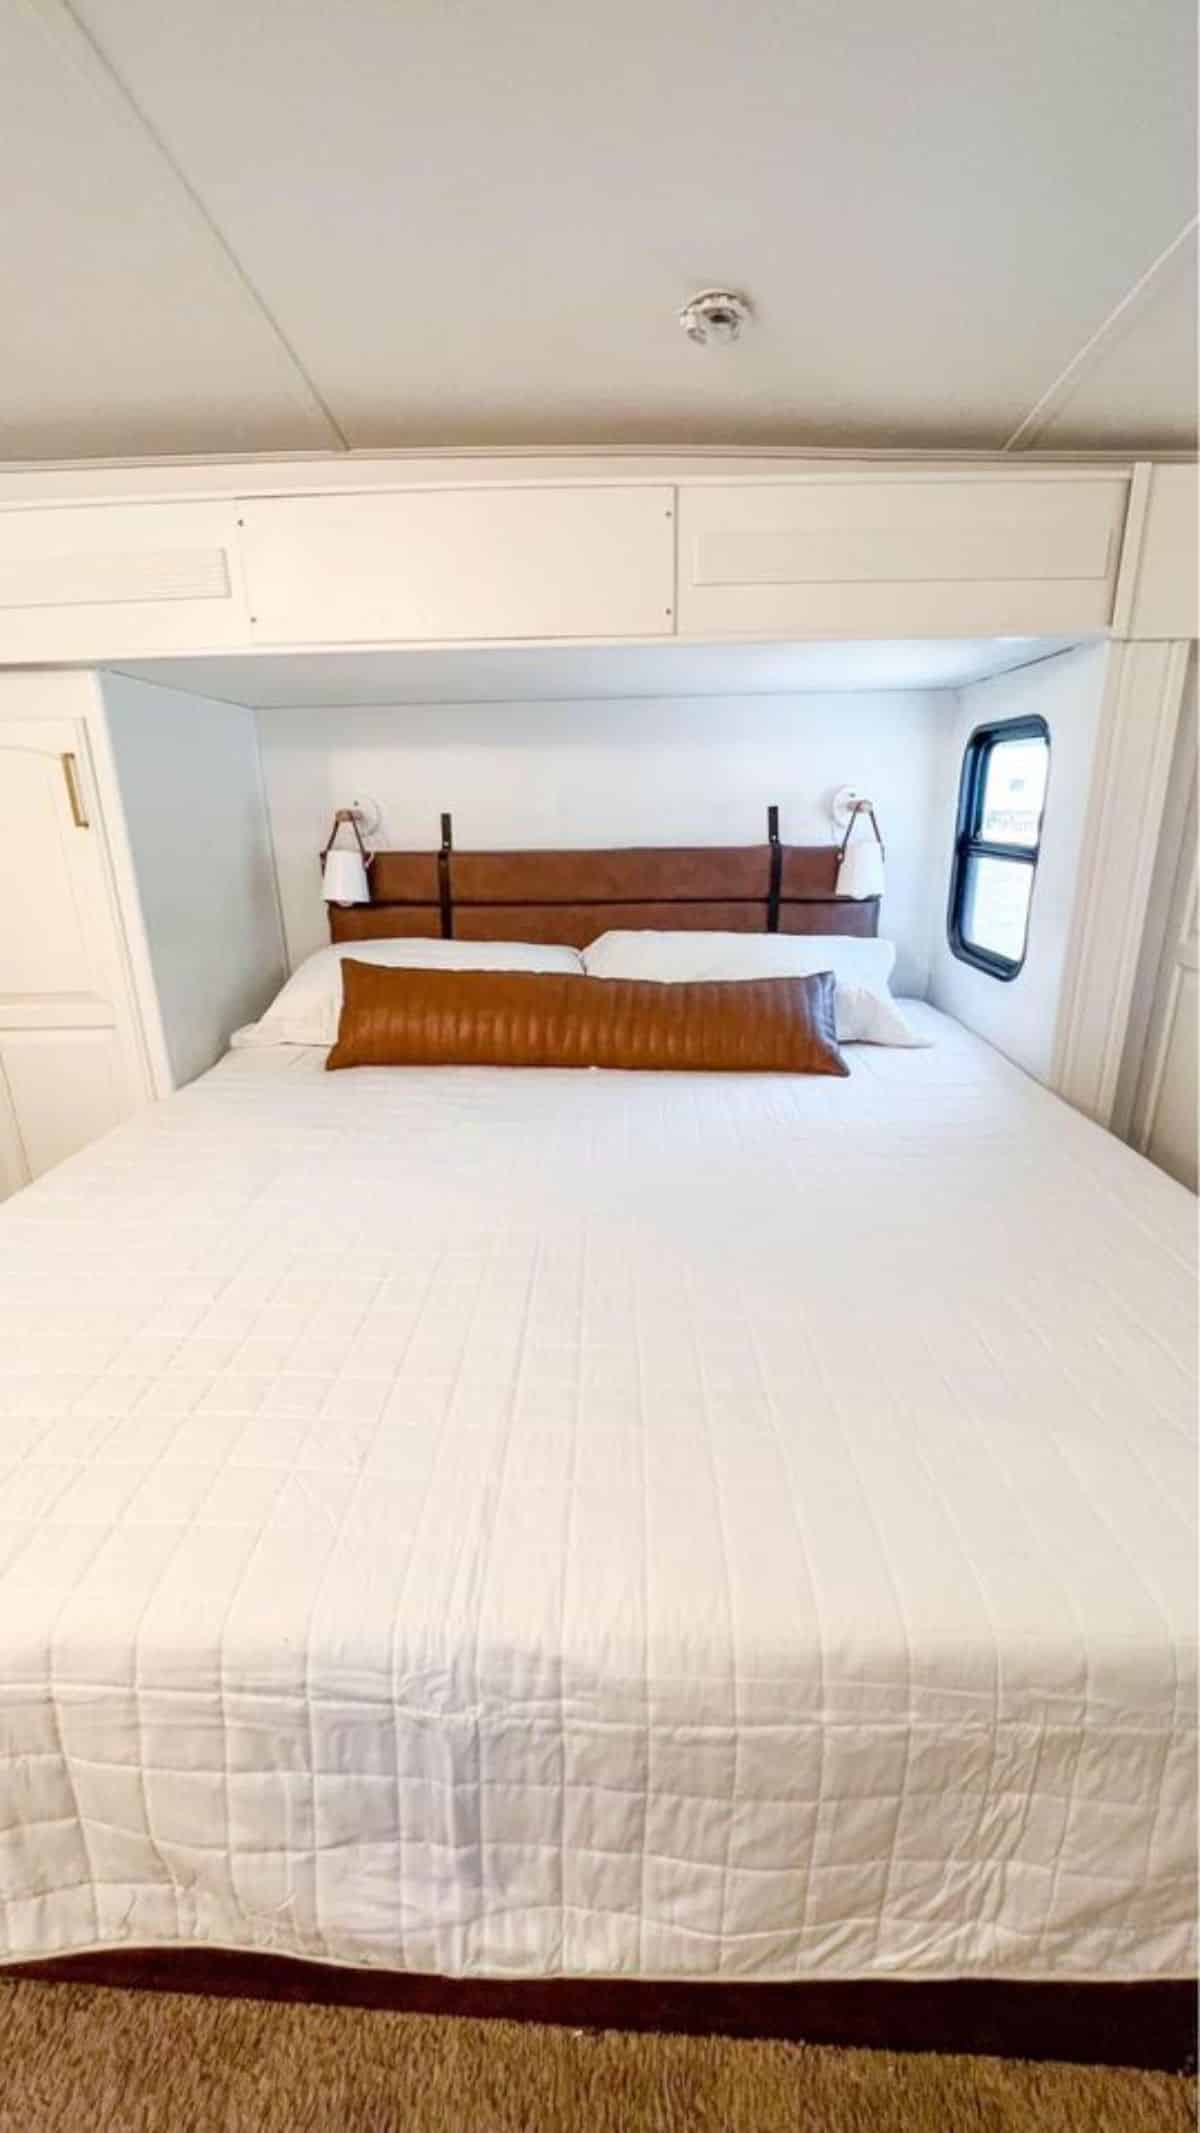 King sized bed in bedroom of 40' Tiny House